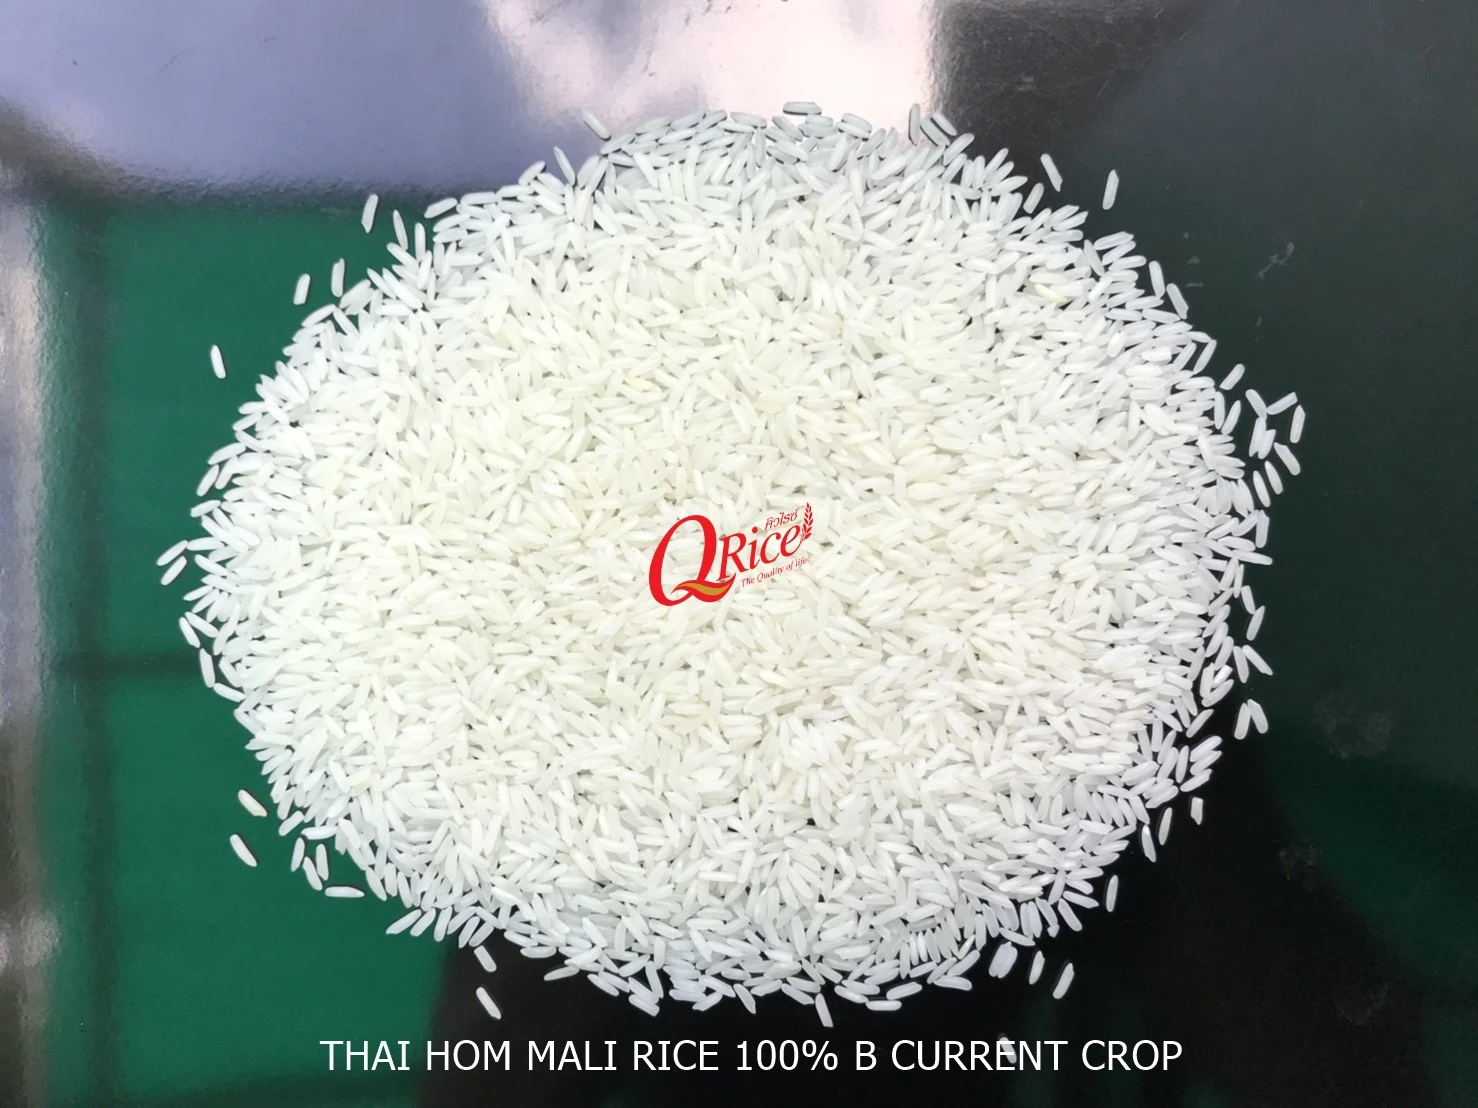 Soft Tender and Aromatic Long-Grain Rice Thai Hom Mali Rice Current Crop